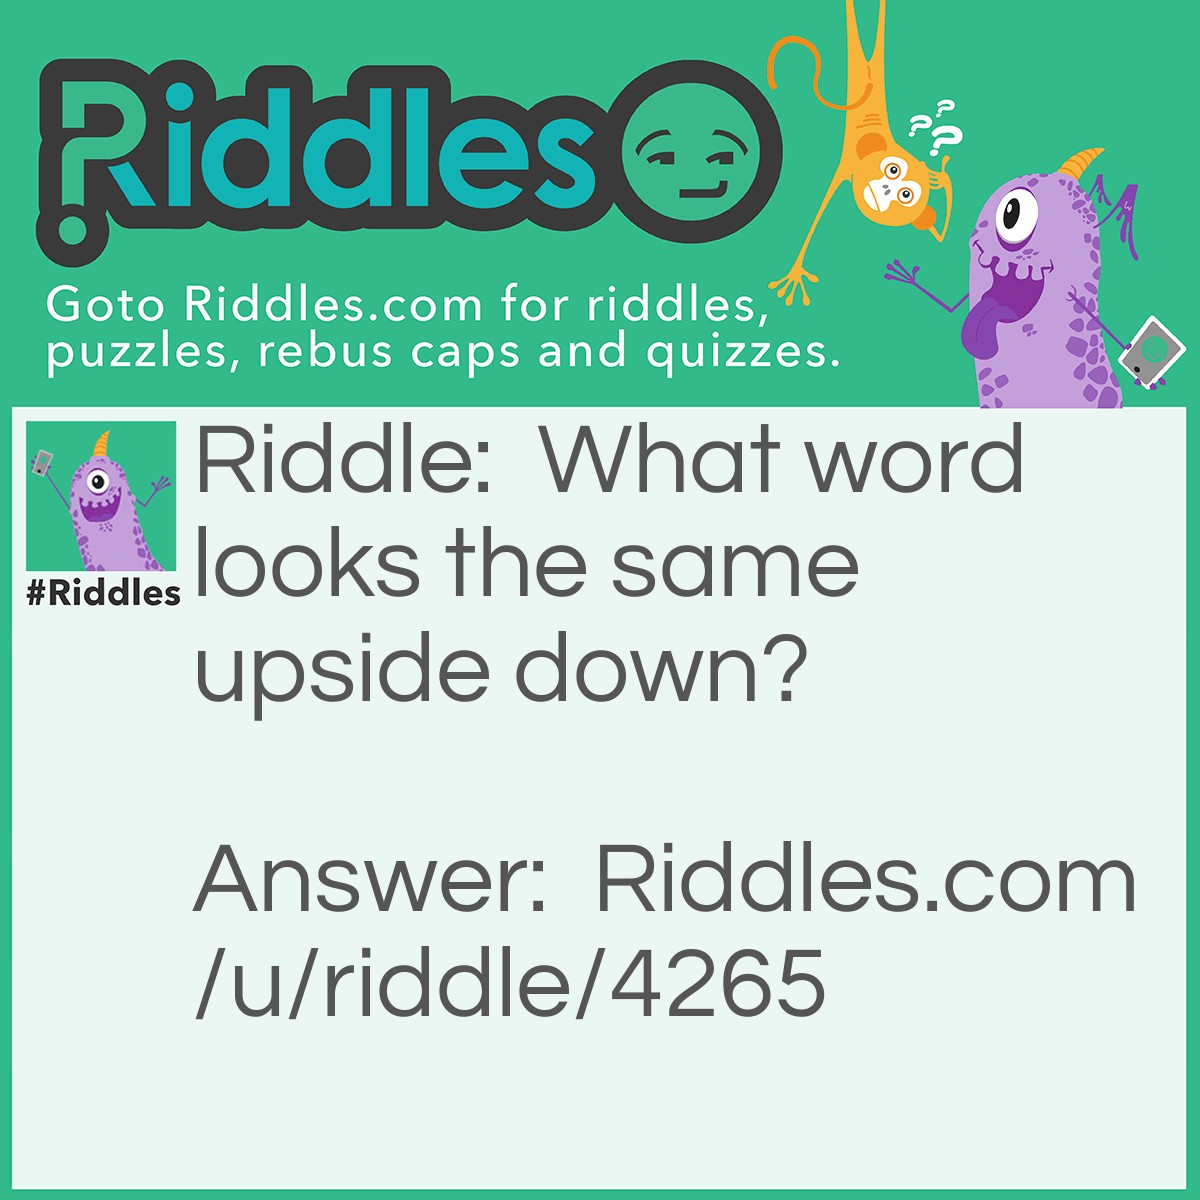 Riddle: What word looks the same upside down? Answer: Swims.